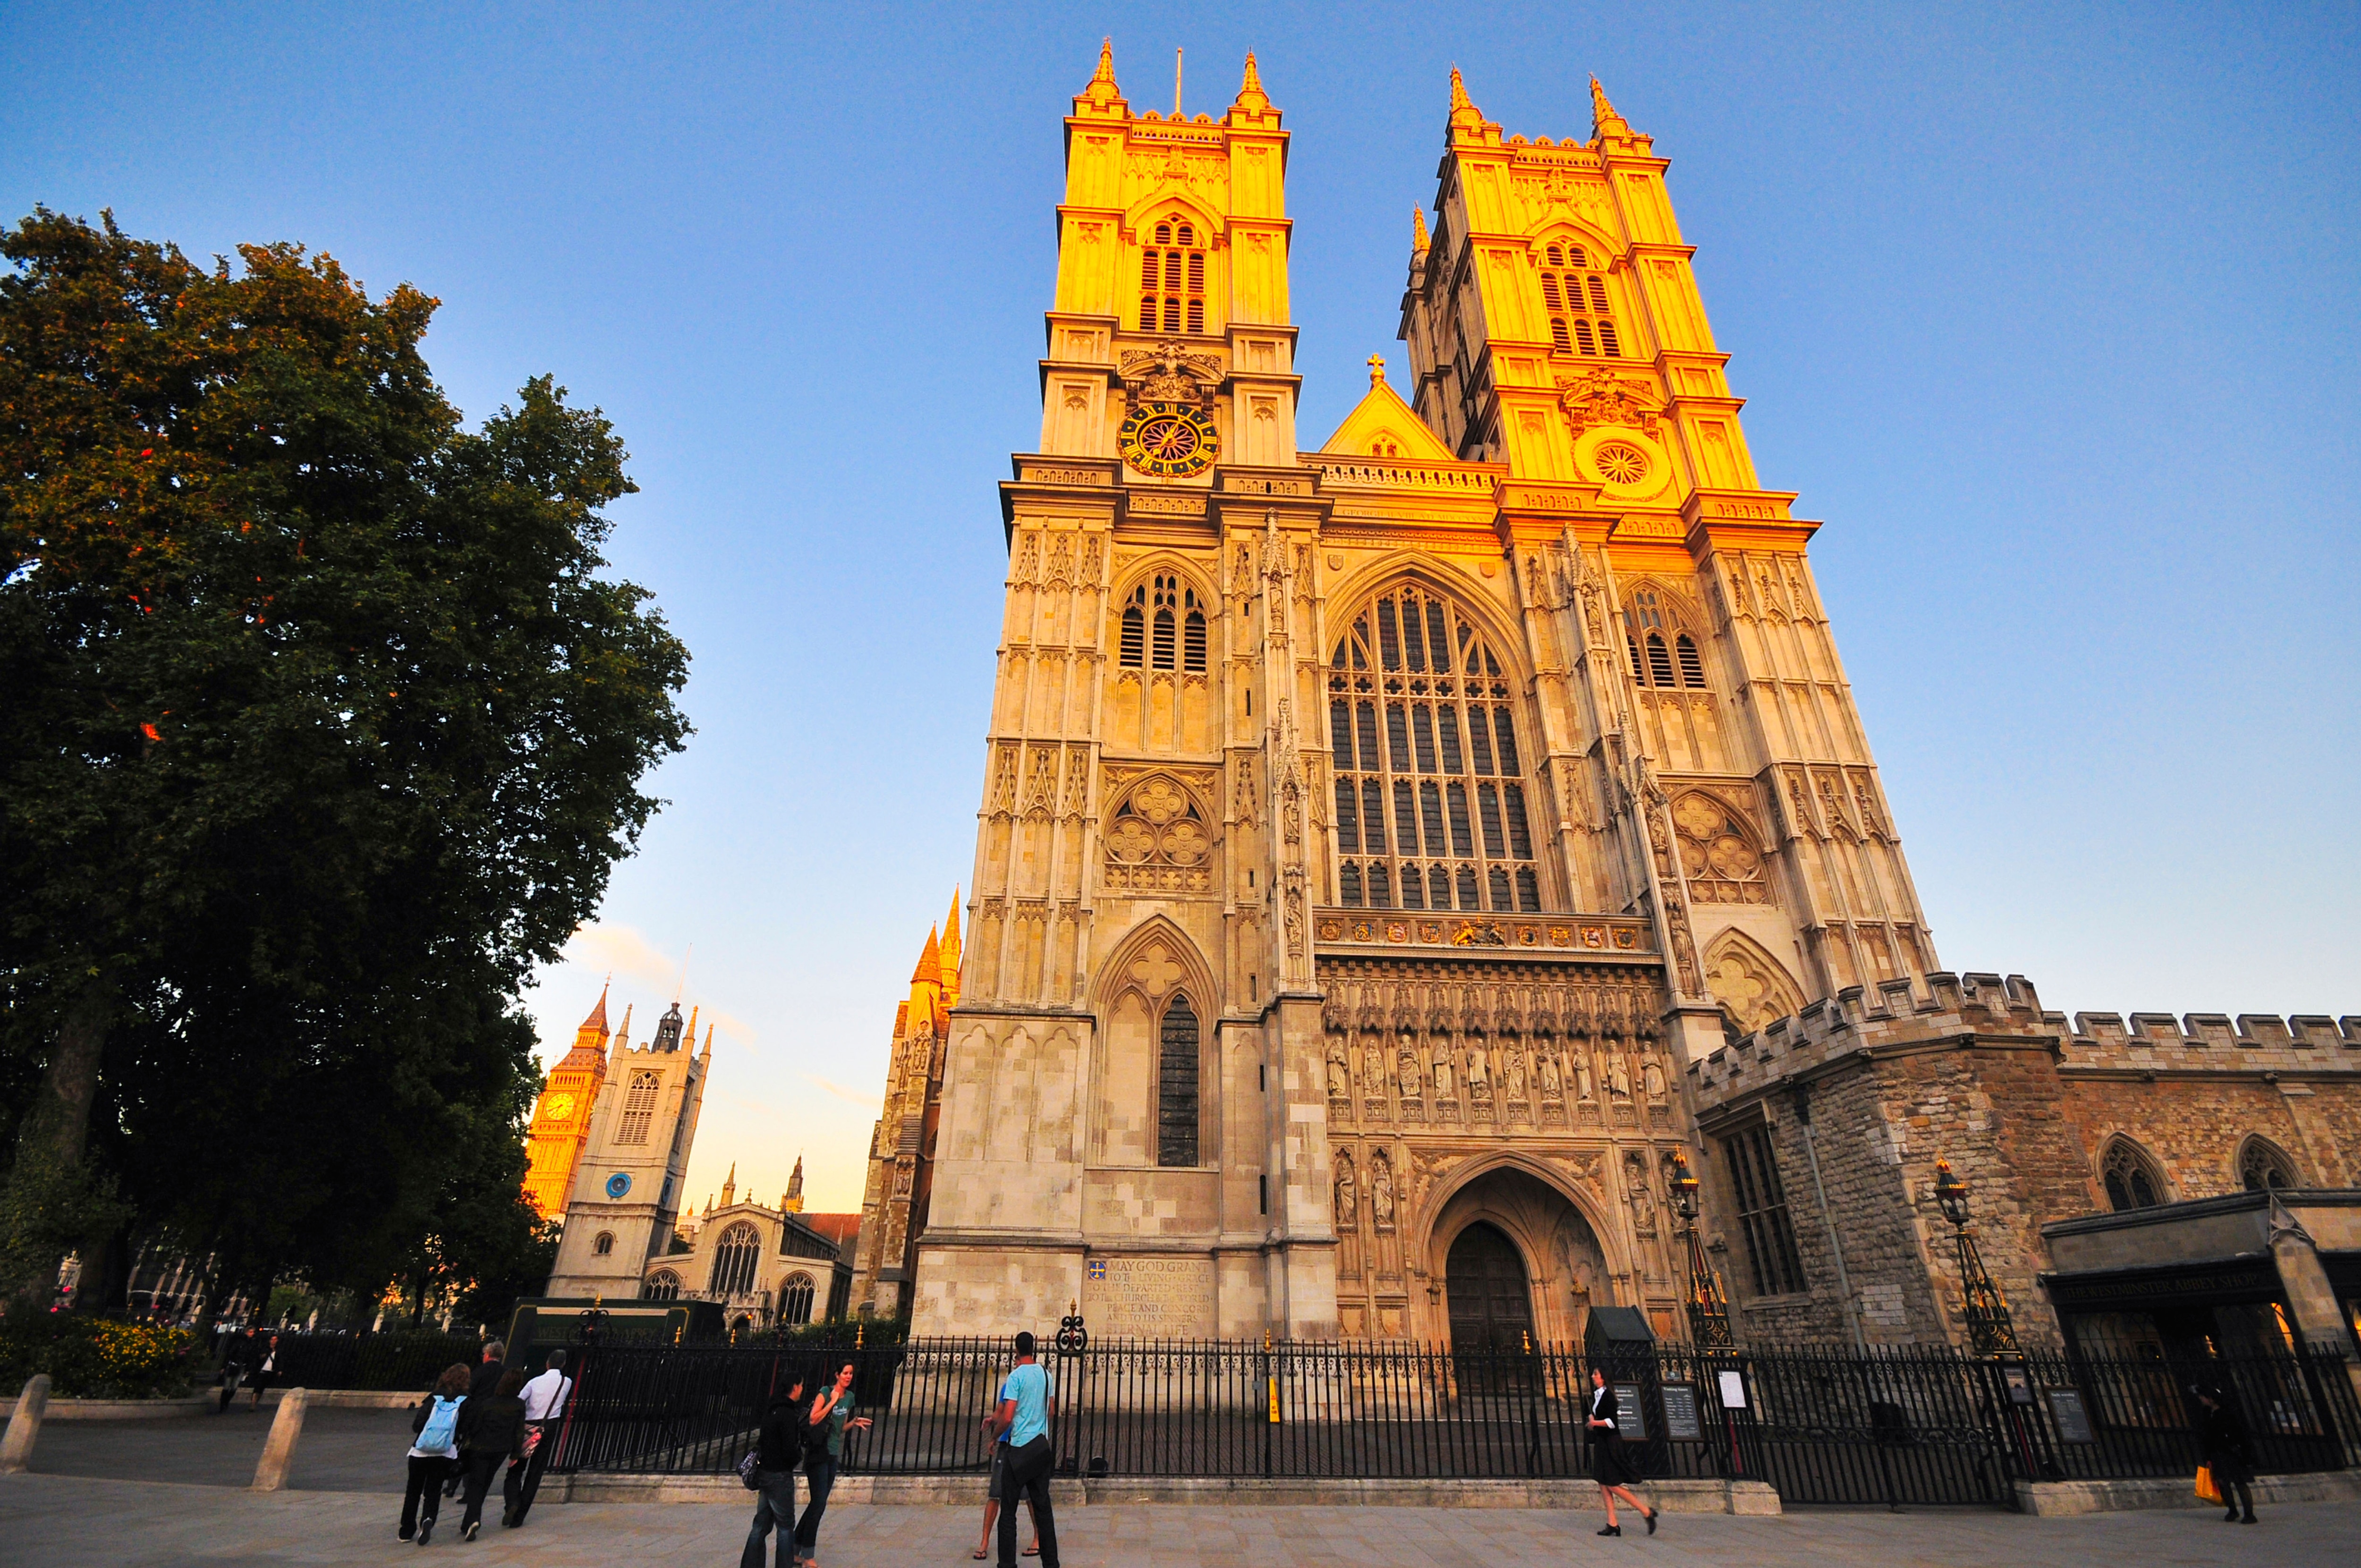 can u visit westminster abbey